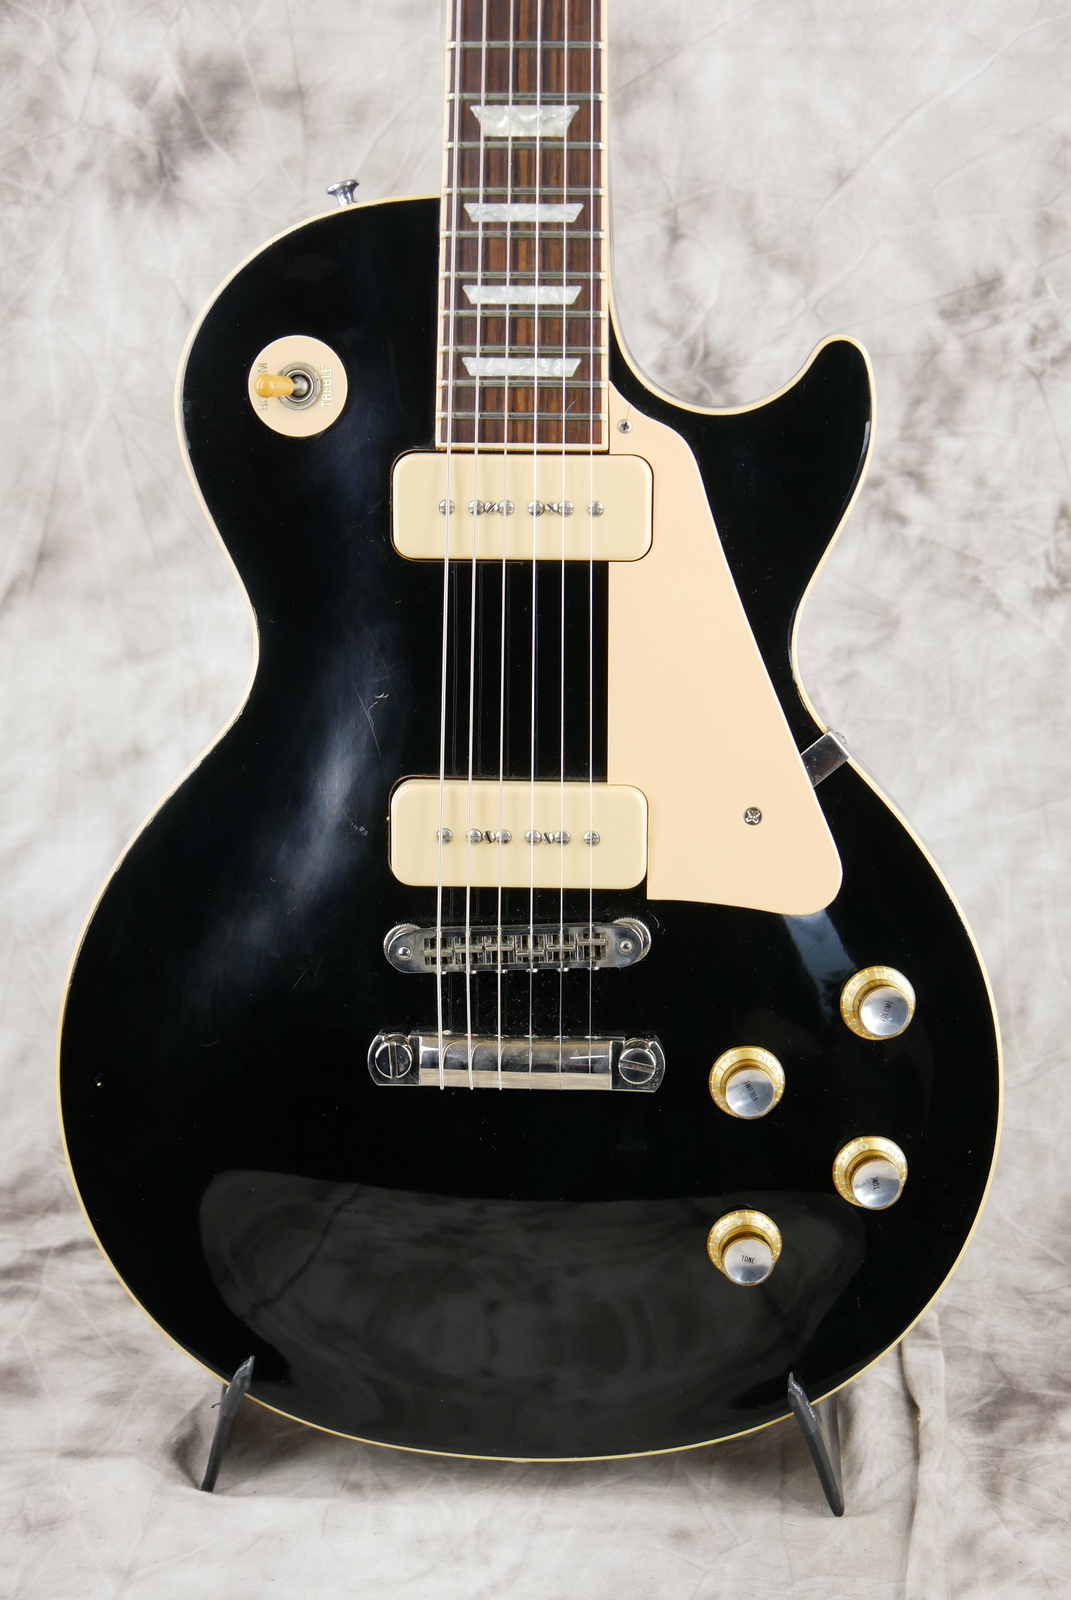 img/vintage/5337/Gibson_Les_Paul_Deluxe_limited_edtion_black_2000-003.JPG